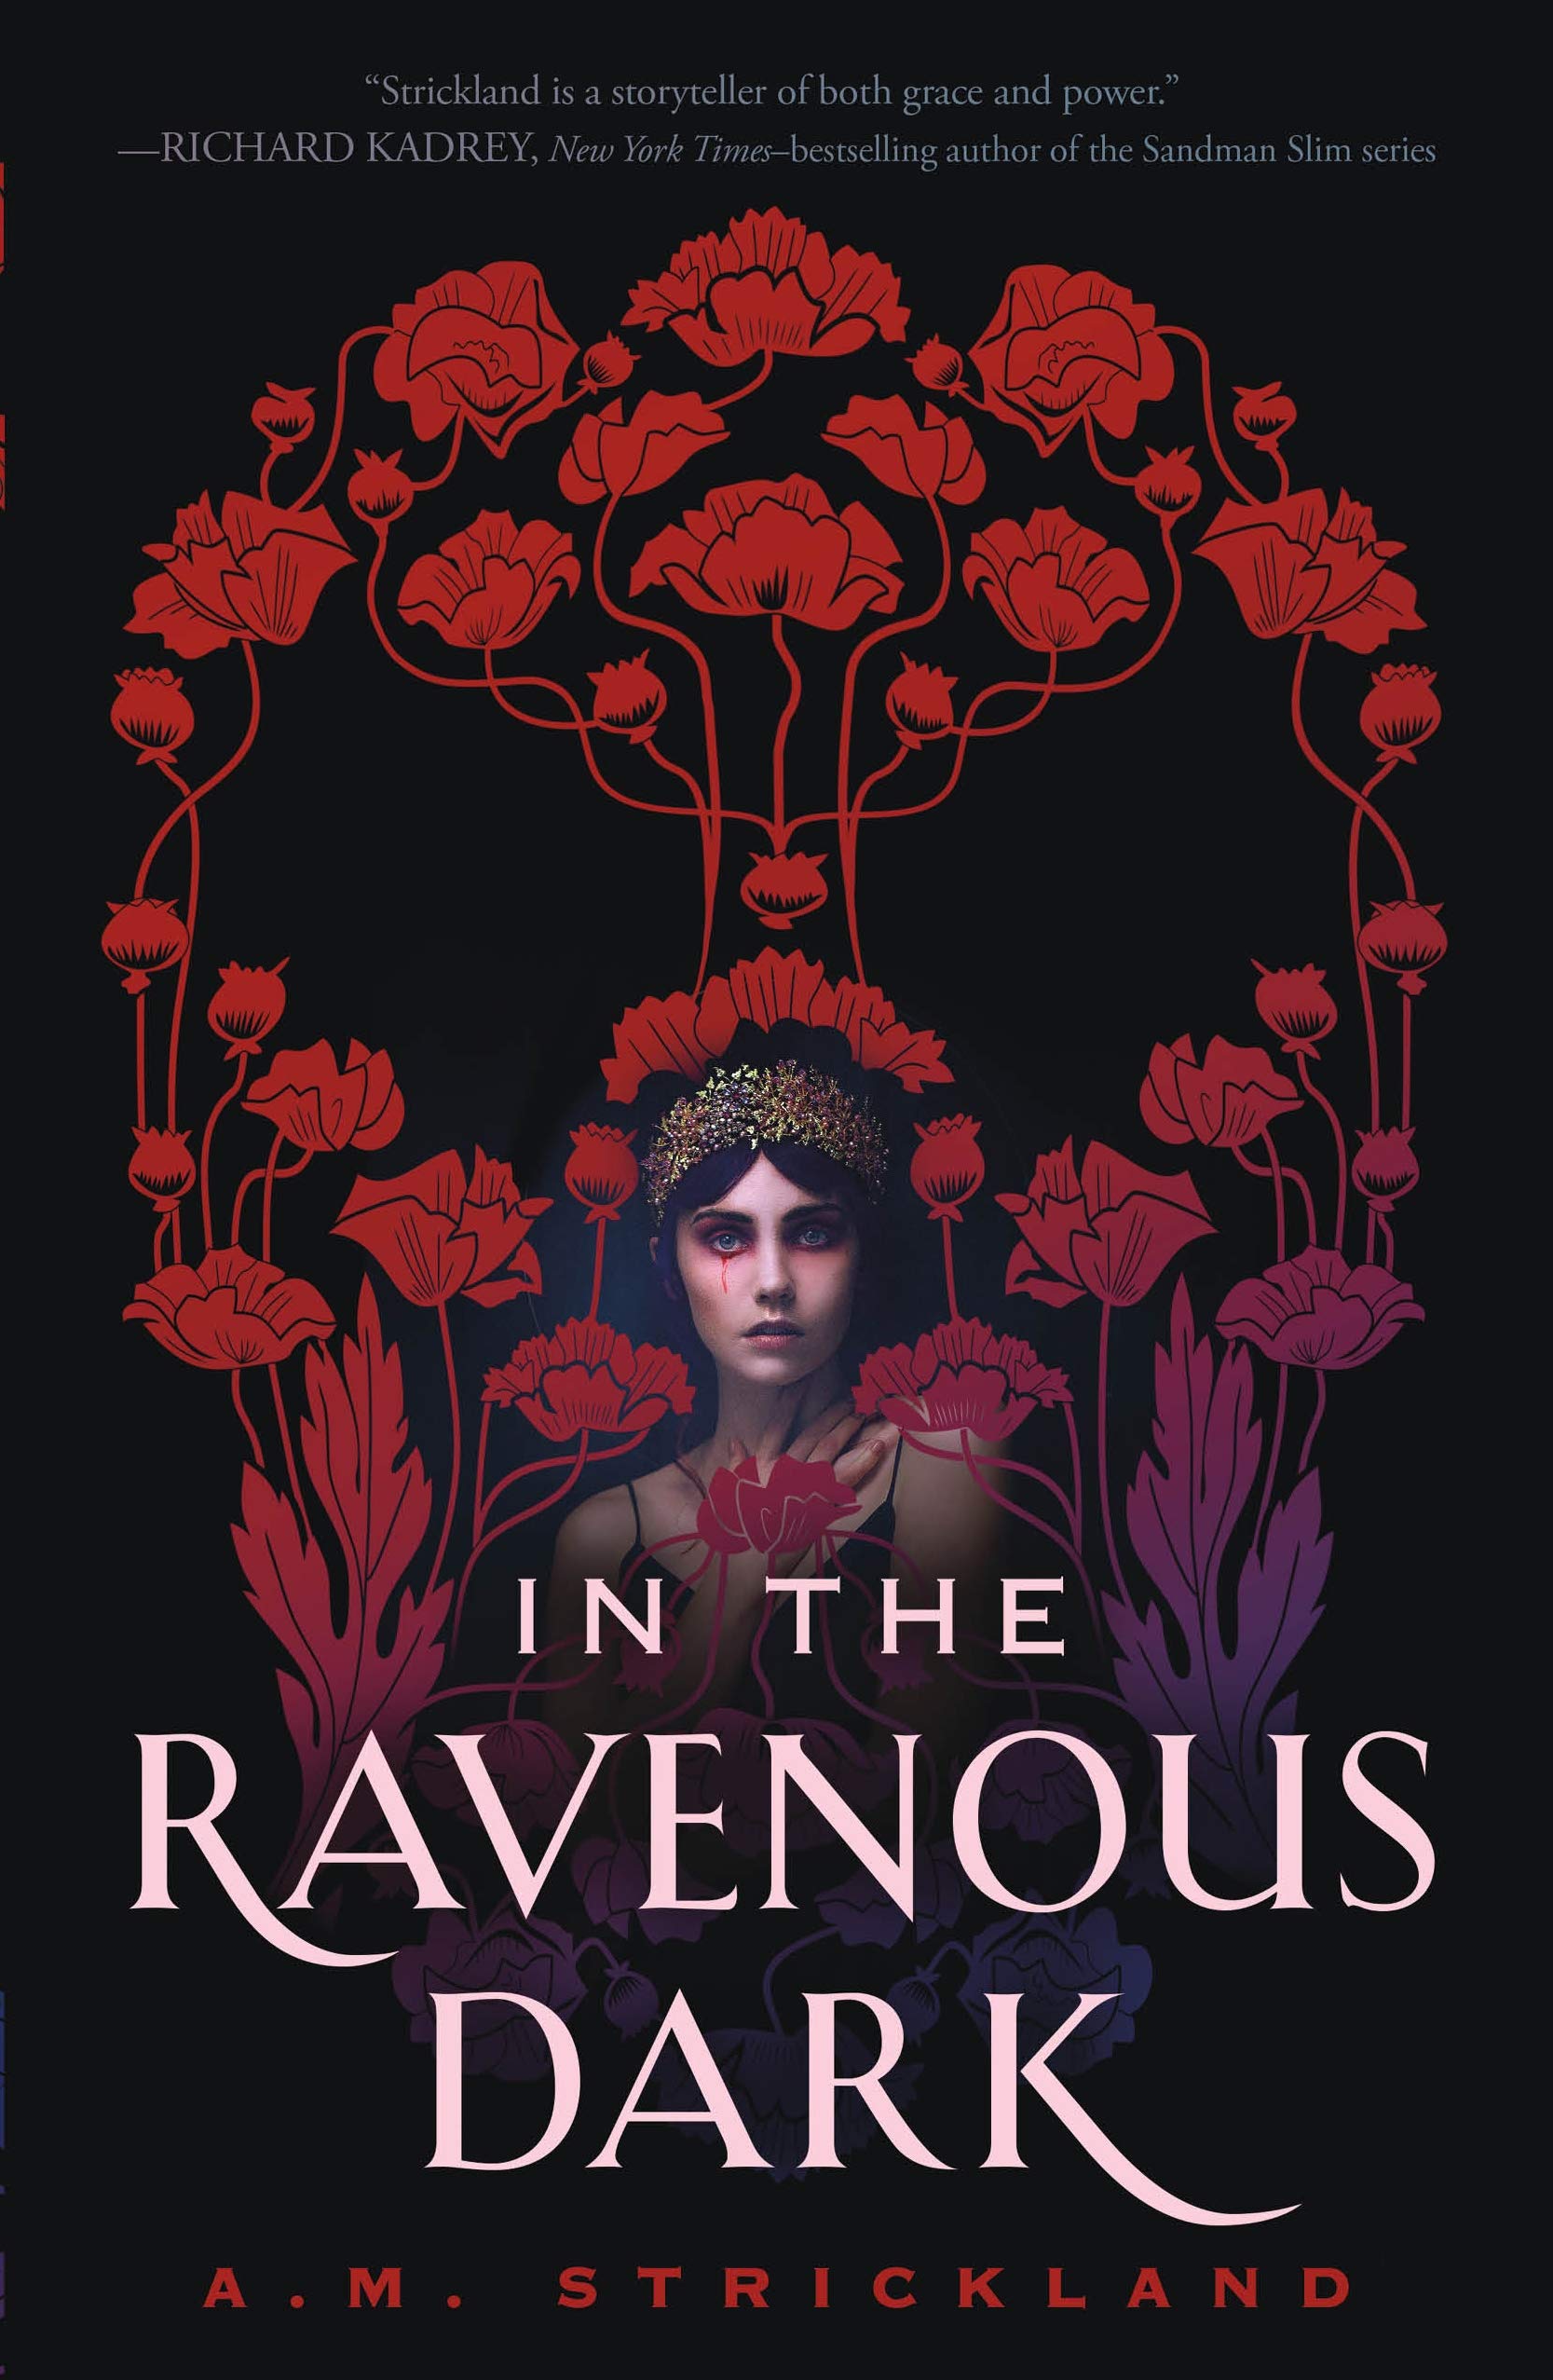 In the Ravenous Dark by A.M. Strickland